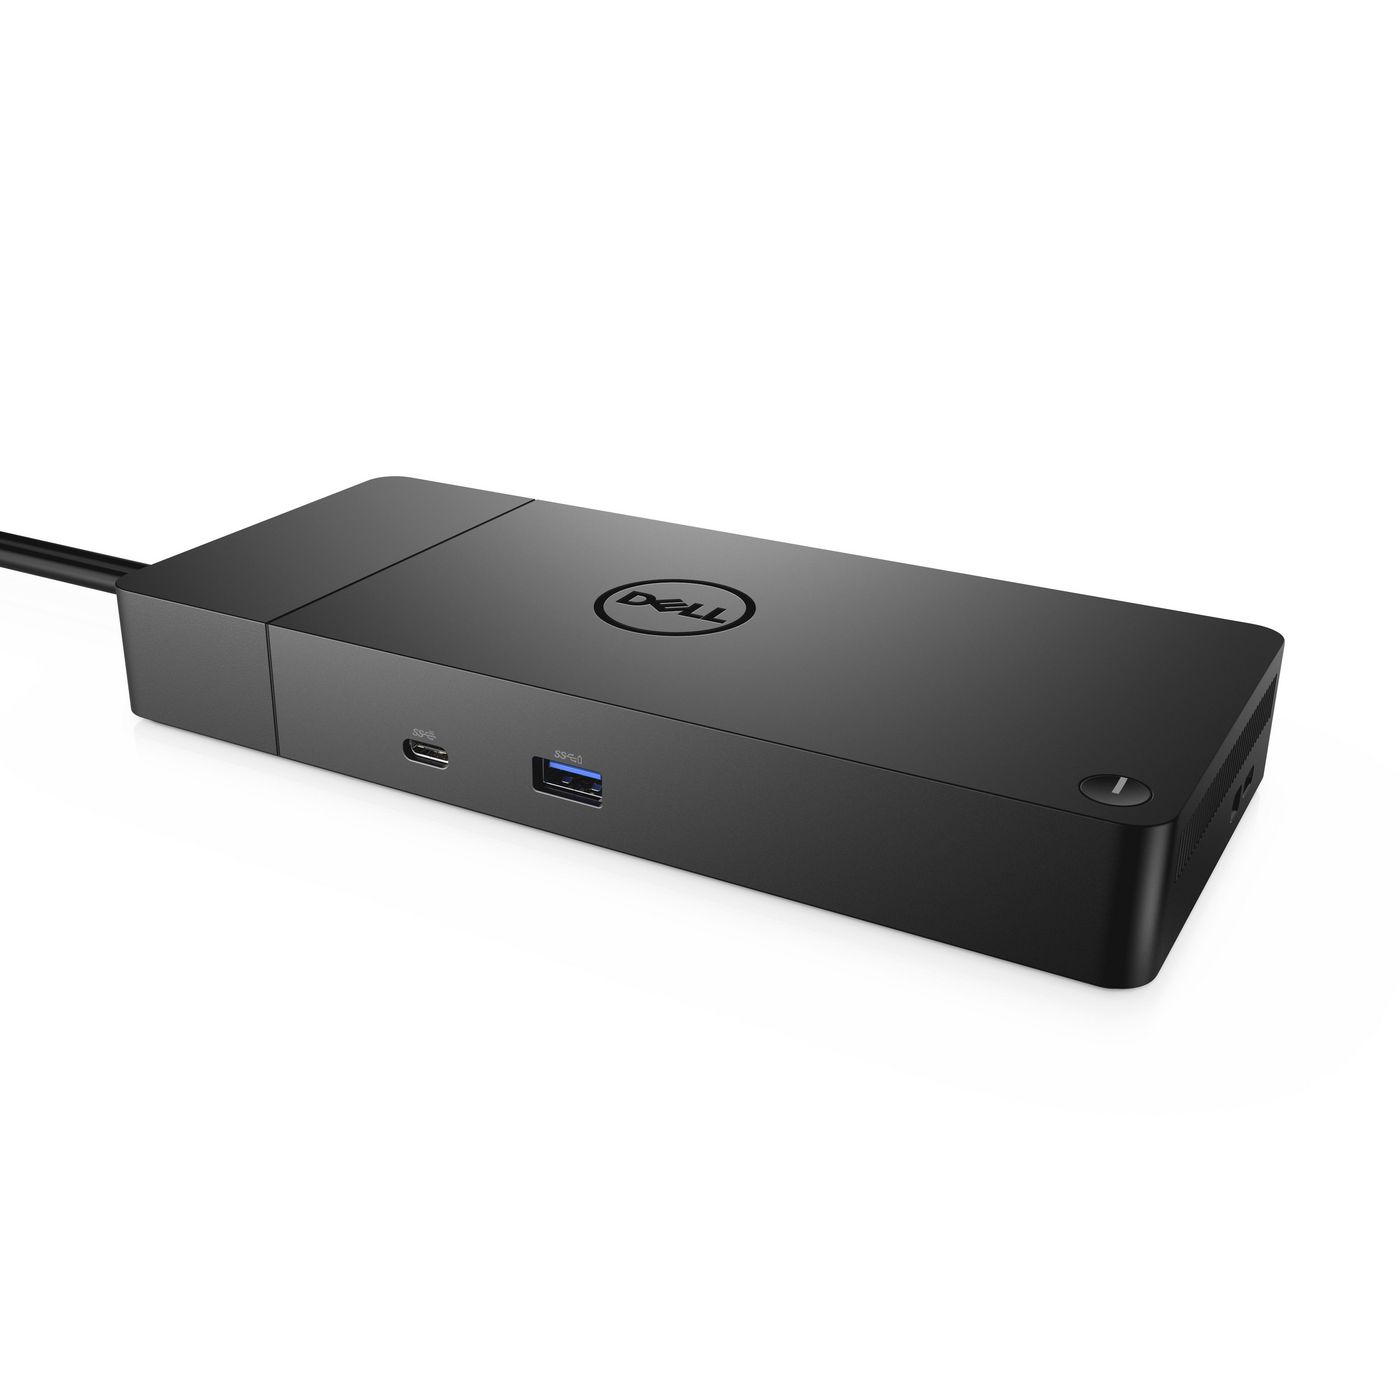 Photos - Card Reader / USB Hub Dell WD19 Performance Dock – WD19DCS includes power cable. For UK,EU. WD19 